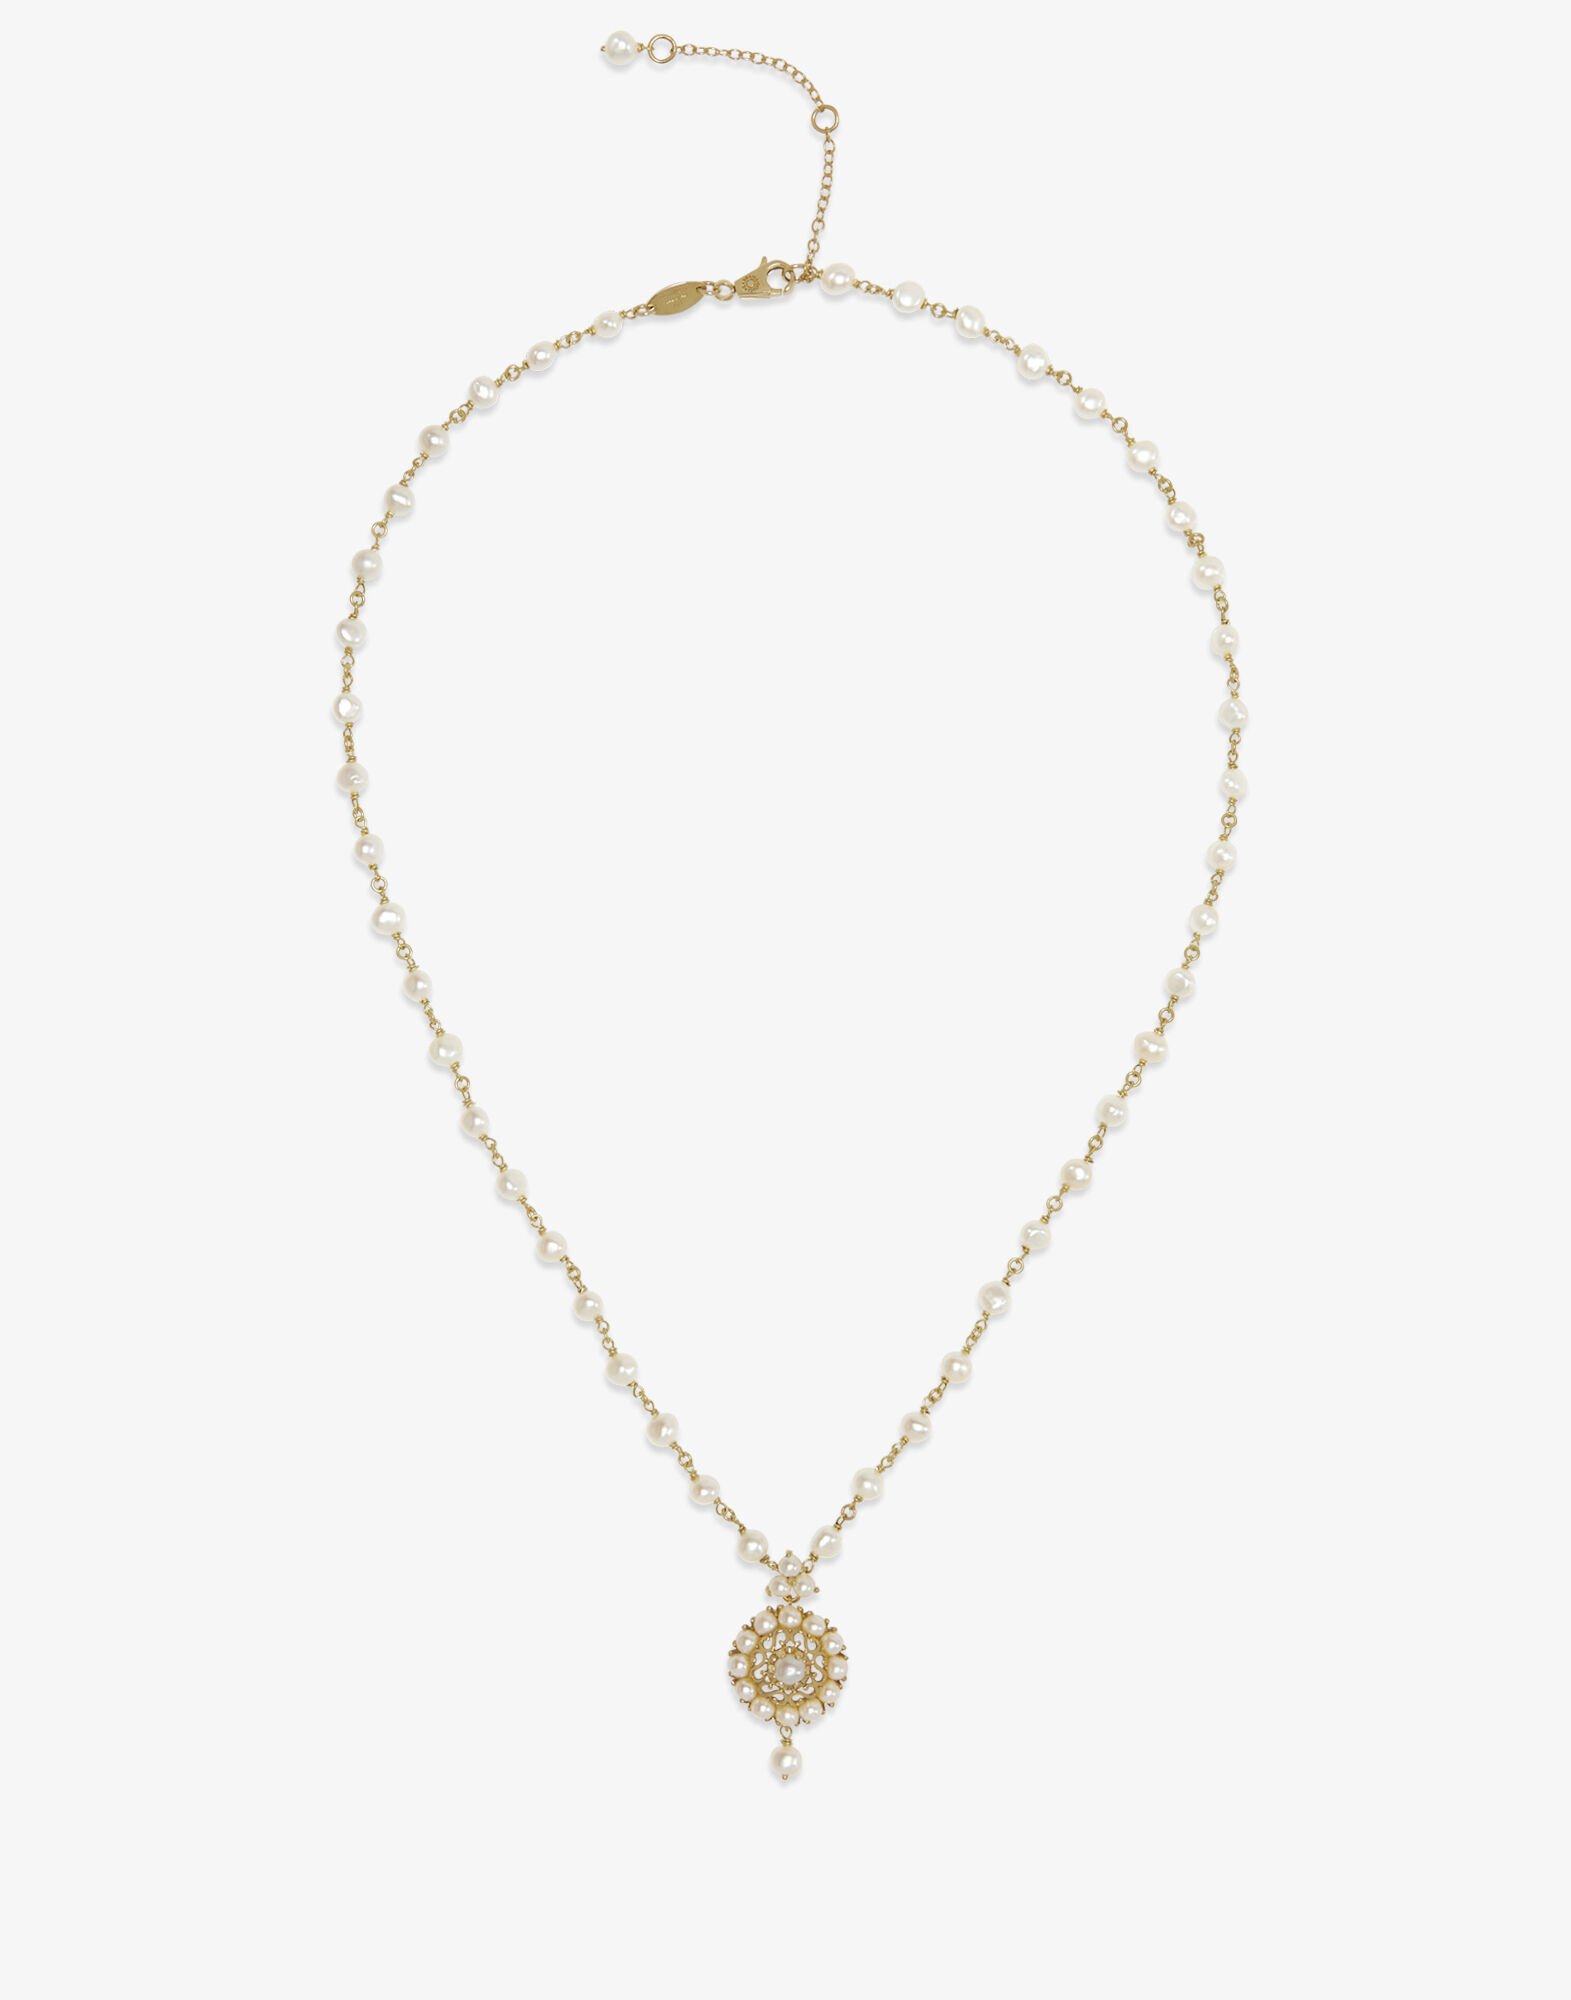 Dolce & Gabbana Romance necklace in yellow gold with pearls Gold WALK5GWYE01